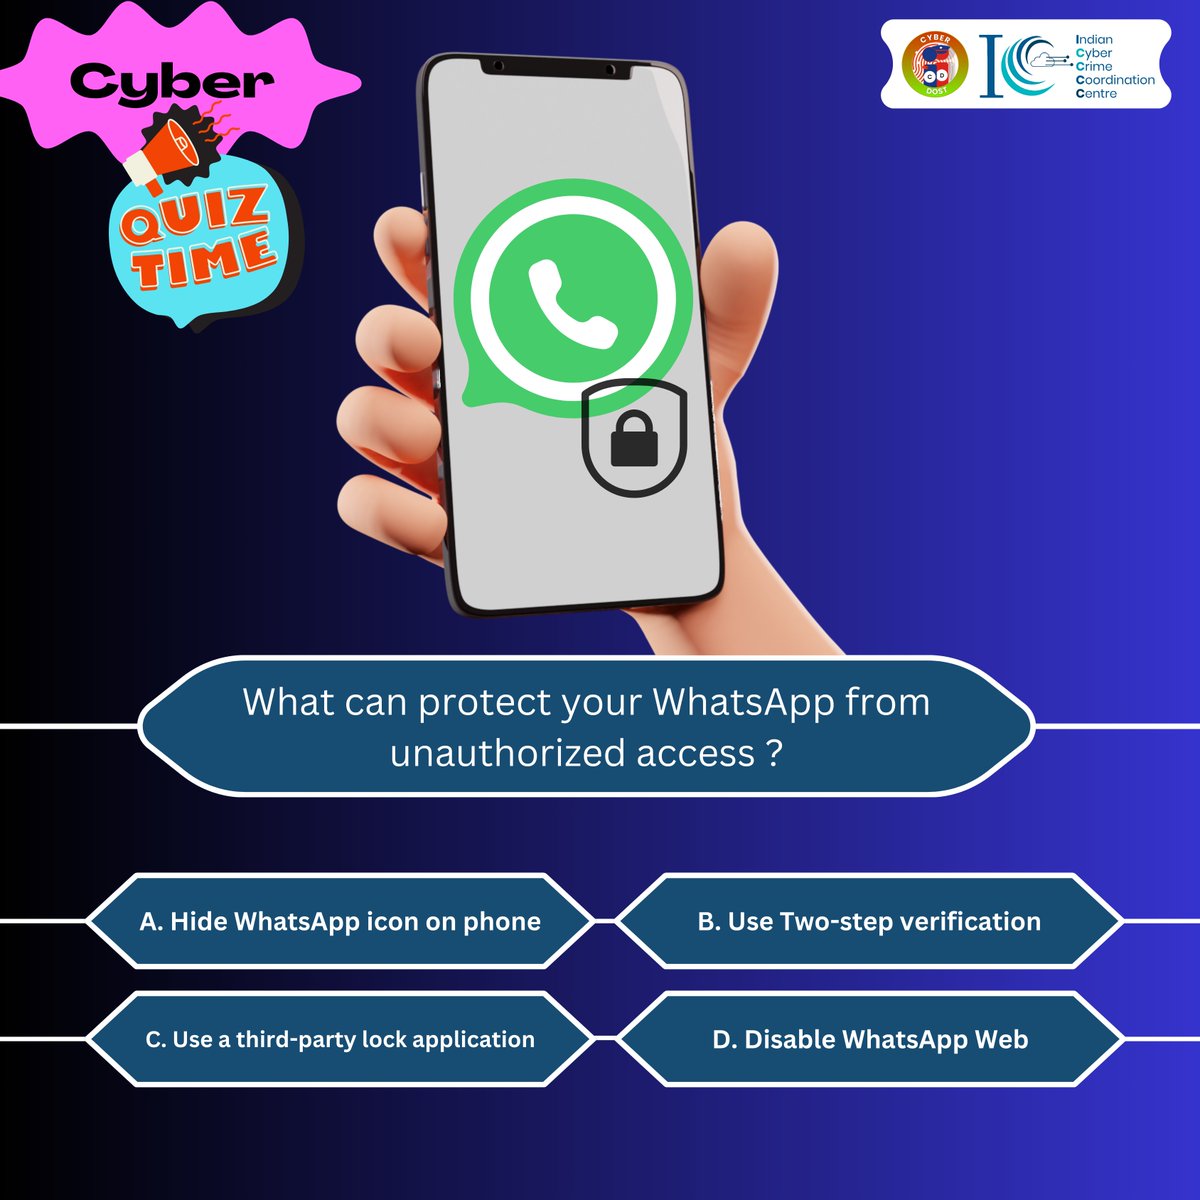 'Guard Your WhatsApp: Your Privacy , Your Control' 

#WhatsAppSecurity #I4C #MHA #dial1930 #Cybersafeindia #News #SocialMediaInsights #Cybercrime #cybersecurity #hacking #cyberattack #security #infosec #hacker #informationsecurity #privacy #cybercrime @MIB_India  @WhatsApp @ANI